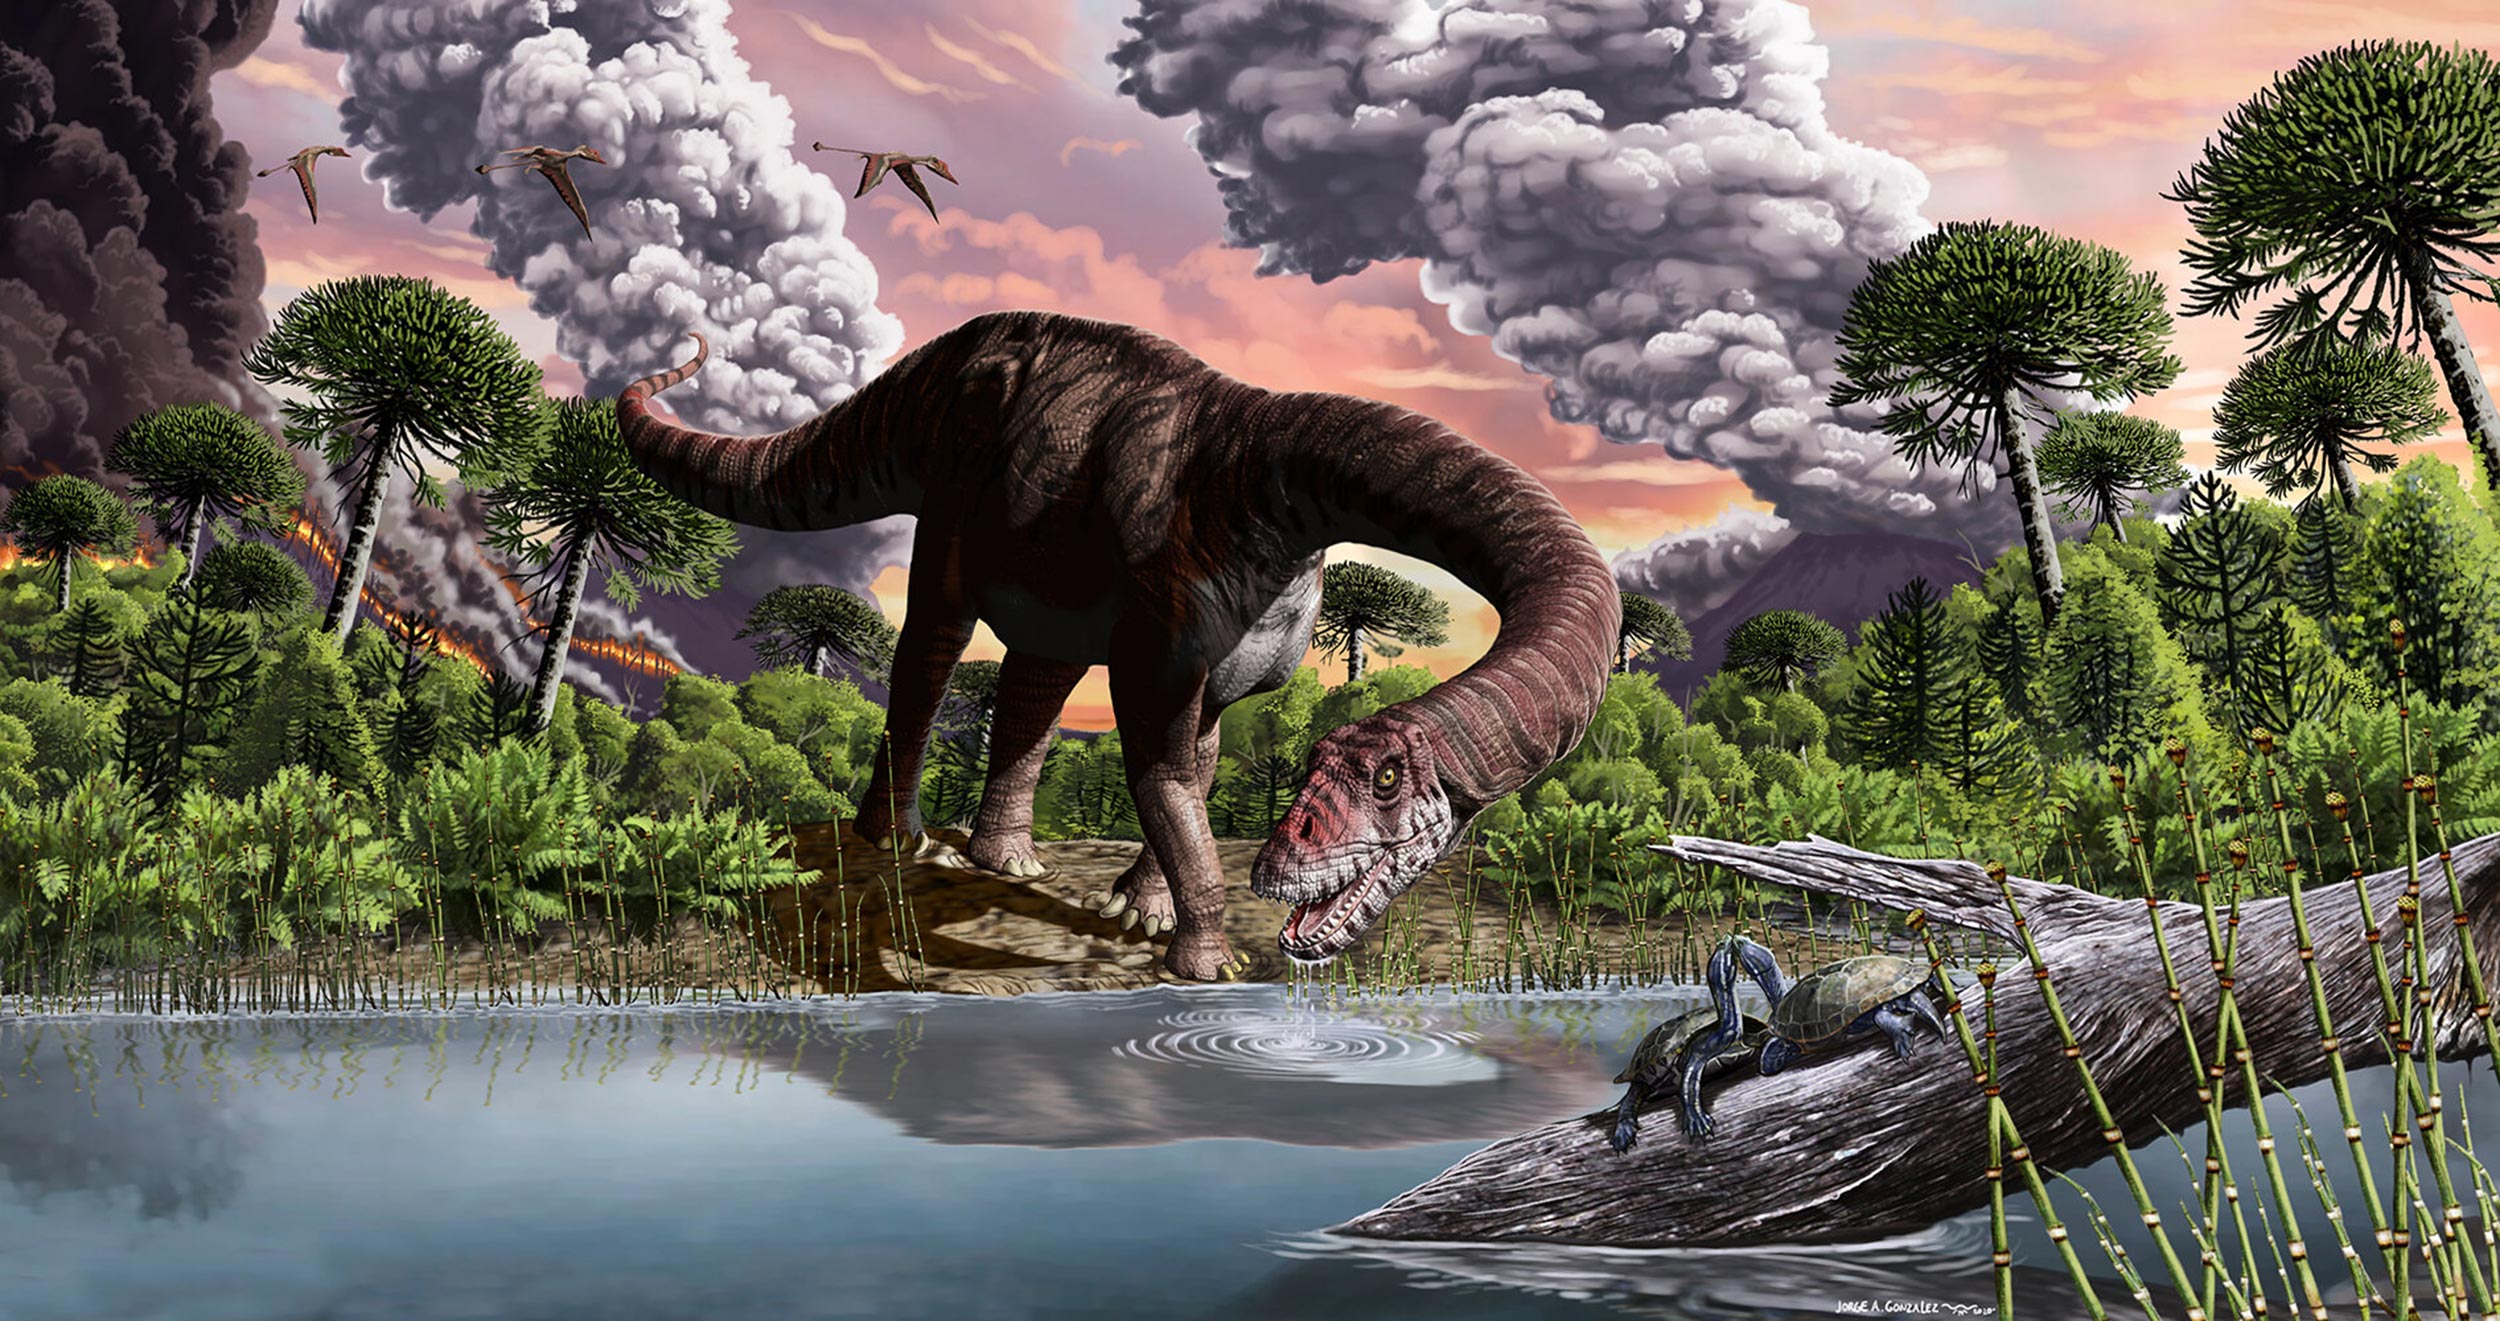 Some Like It Hot: Global Warming Triggered the Evolution of Giant Dinosaurs